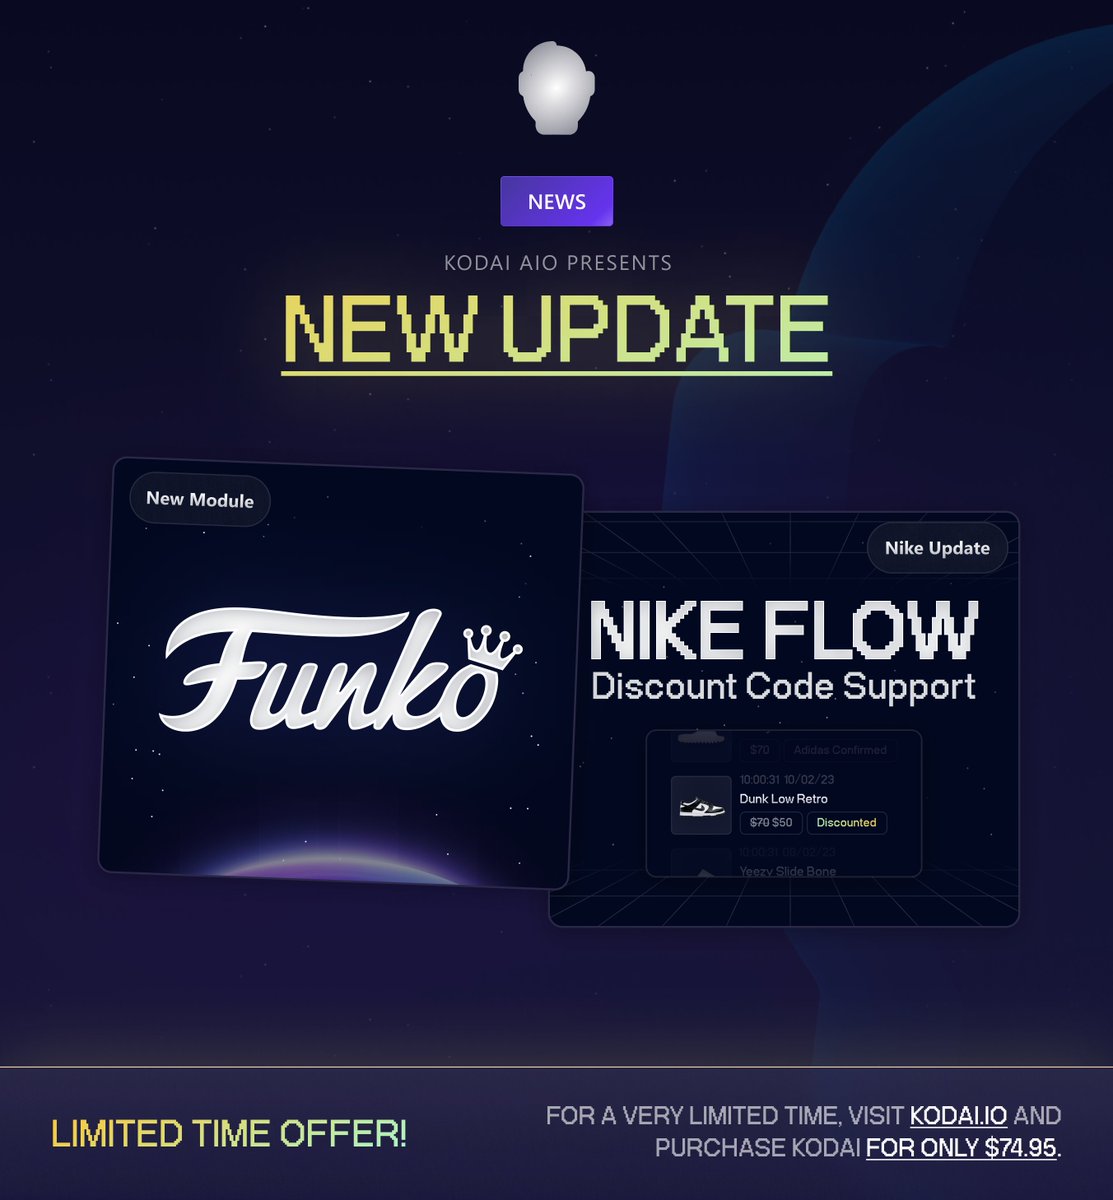 NEW KODAI UPDATE! 🥳 🧸Another new site! FUNKO! ✅ Quantity support. ✅ Run HUNDREDS of tasks with ease. 🎟️ Nike FLOW discount support ✅ Automatically stack discounts to maximize your profits. What are you waiting for? Purchase Kodai today: kodai.io 😏